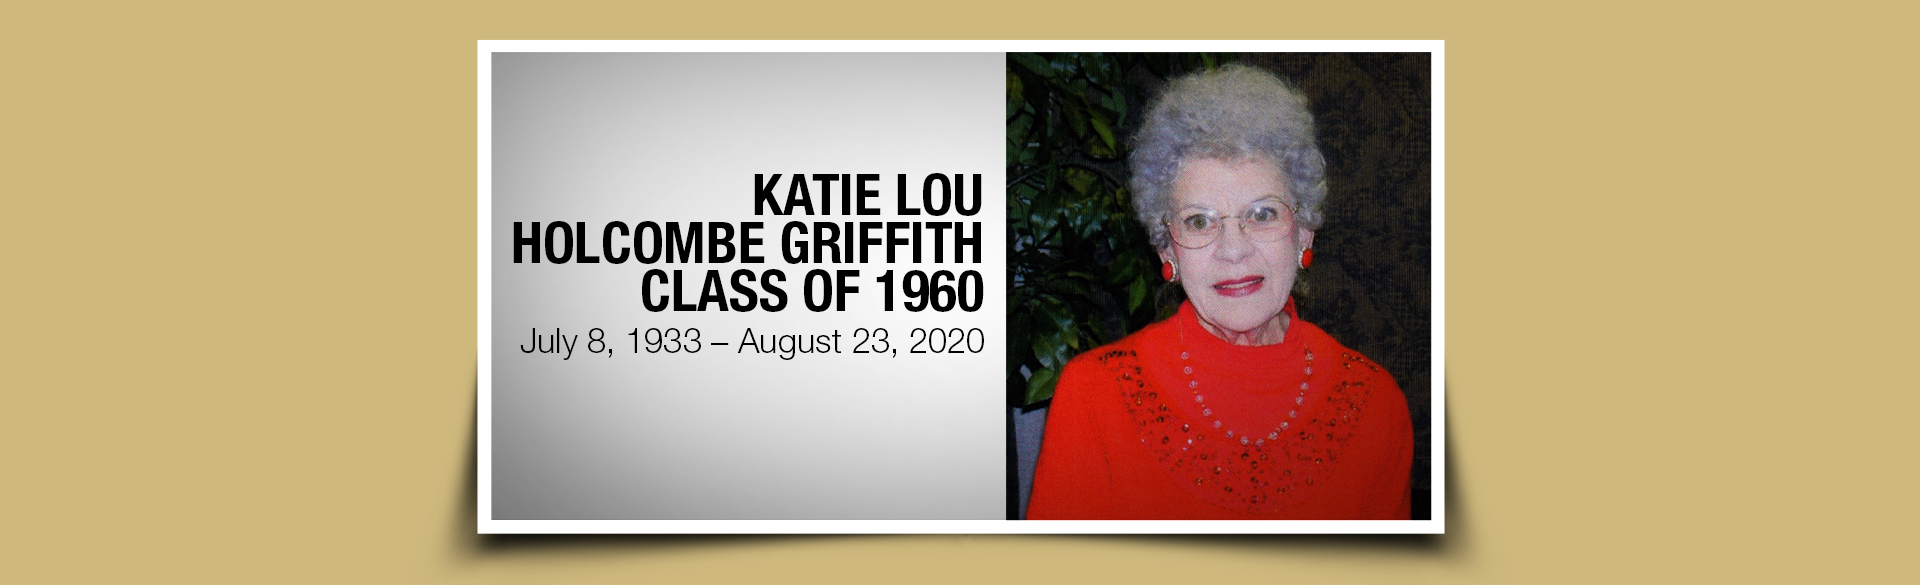 Alumna Katie Lou Holcombe Griffith, Class of 1960